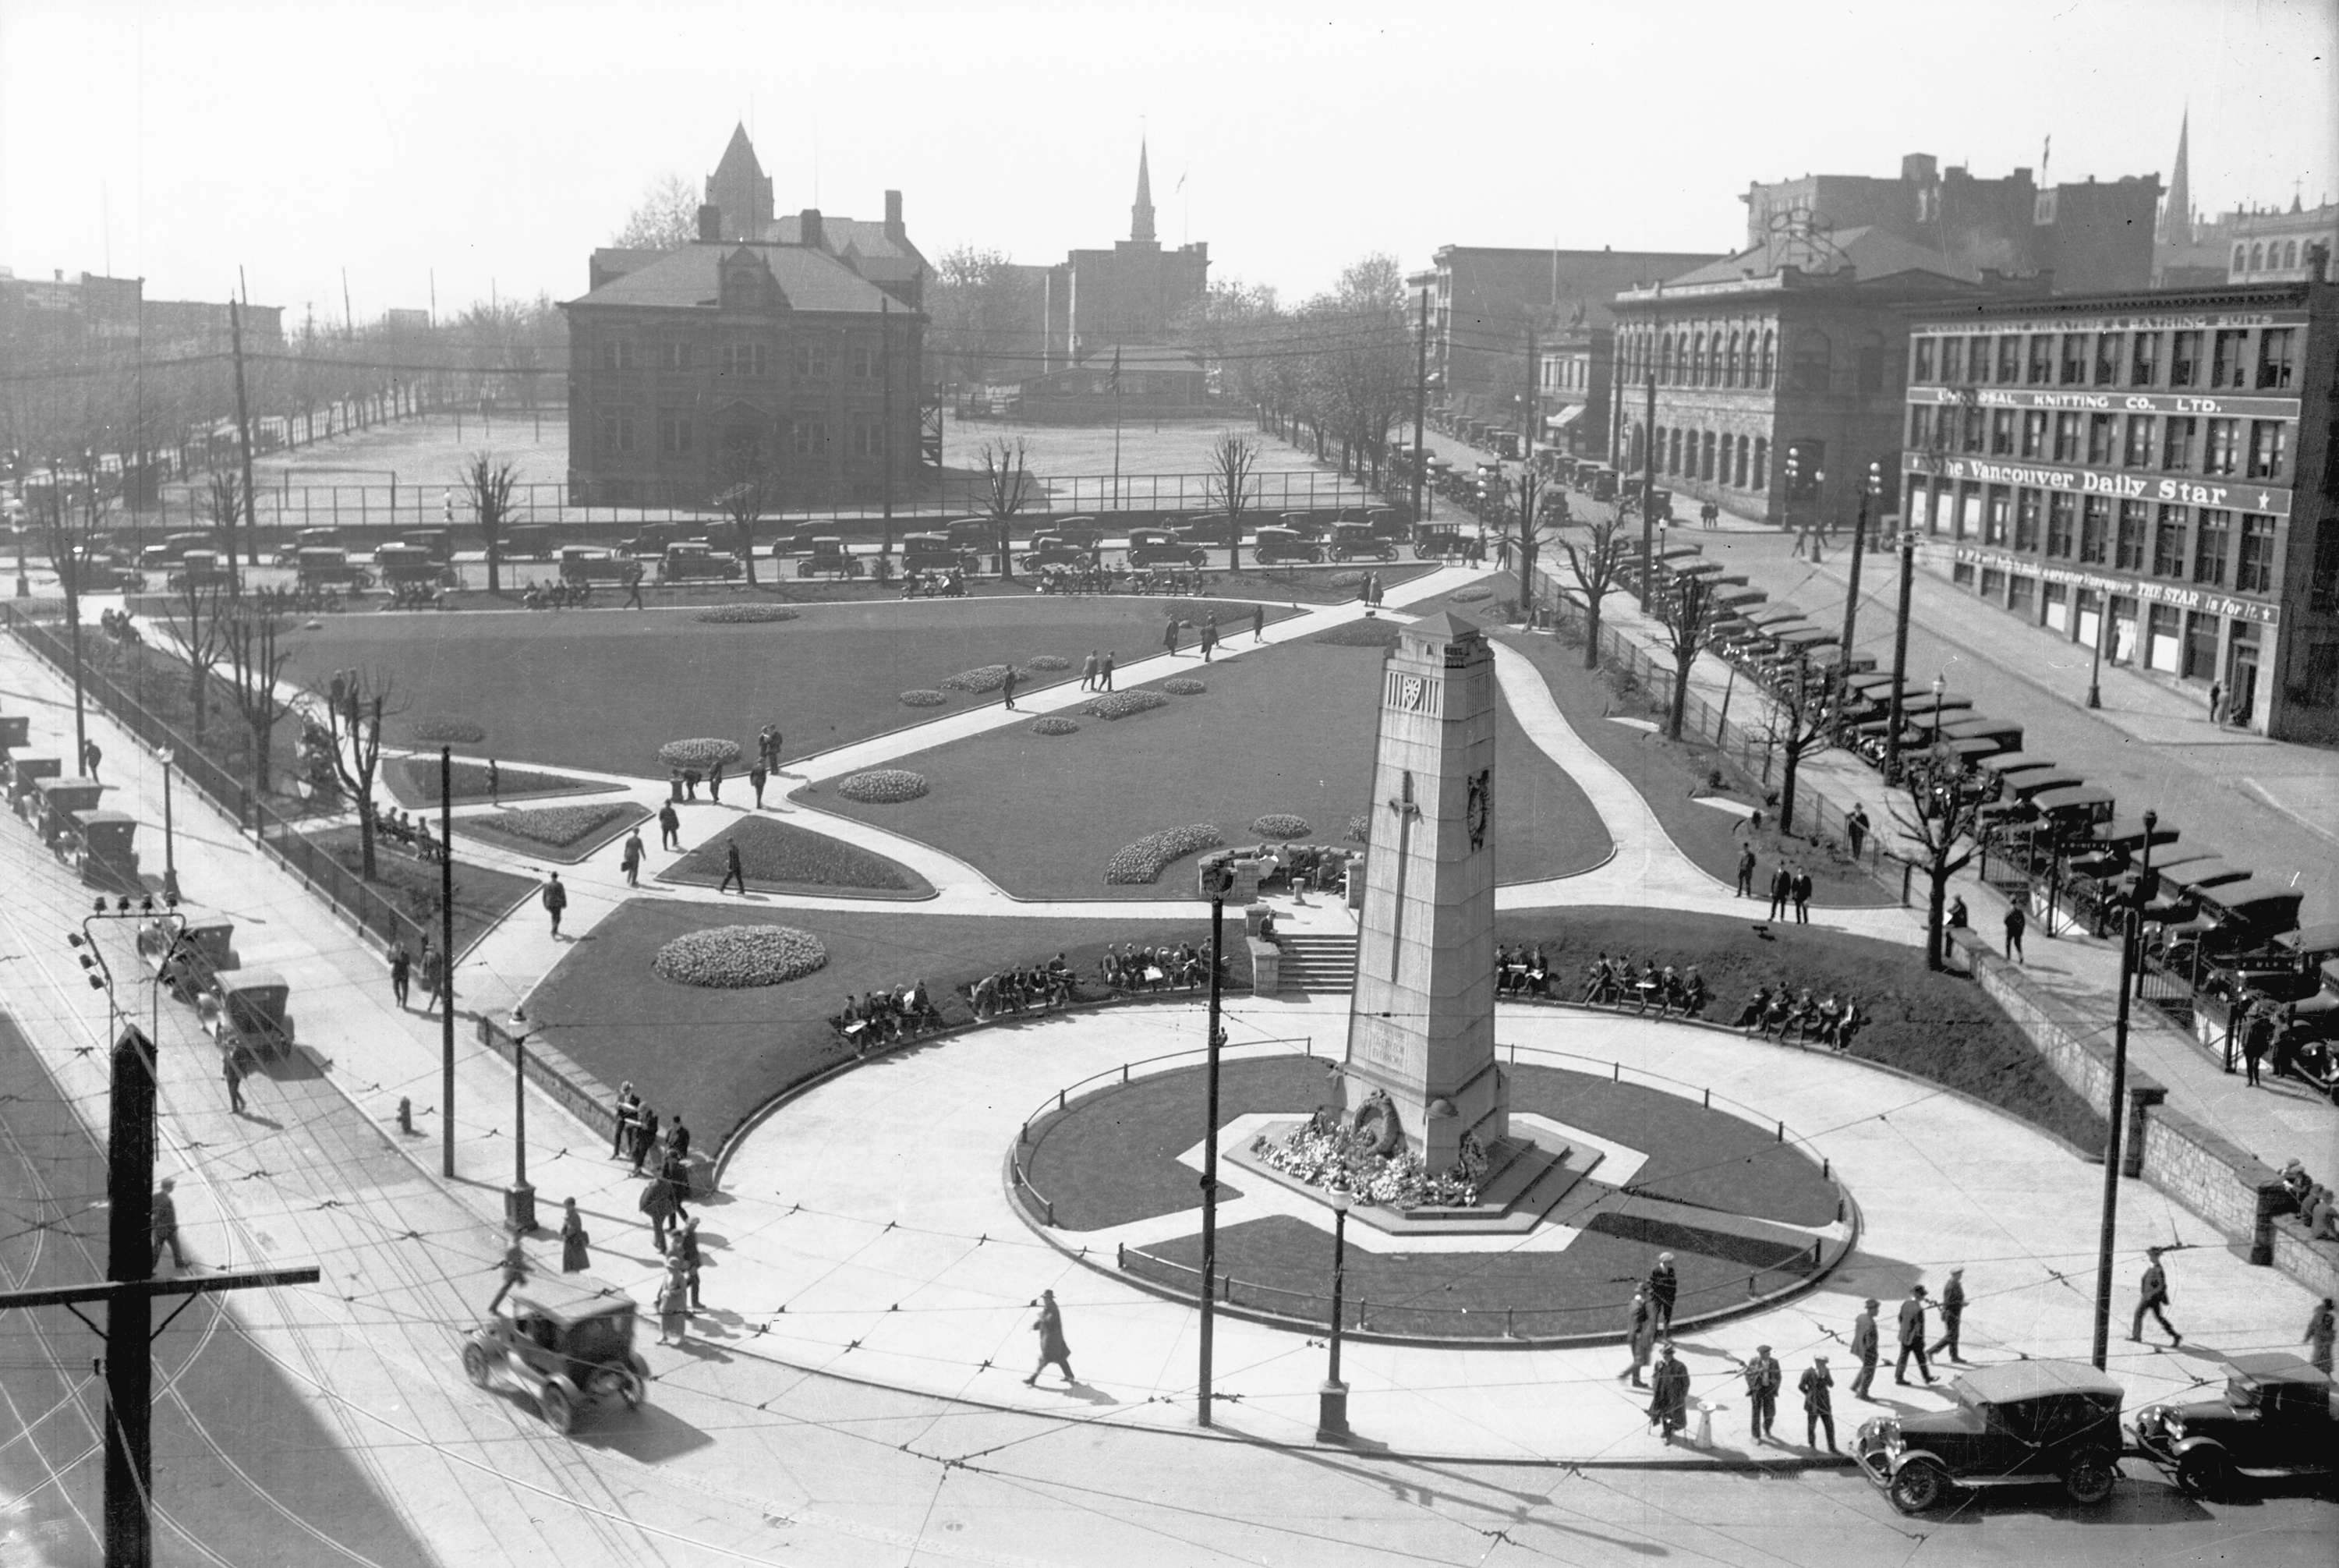 Rectangular stone memorial is the focus of a city square. Landscaping and buildings surround it.